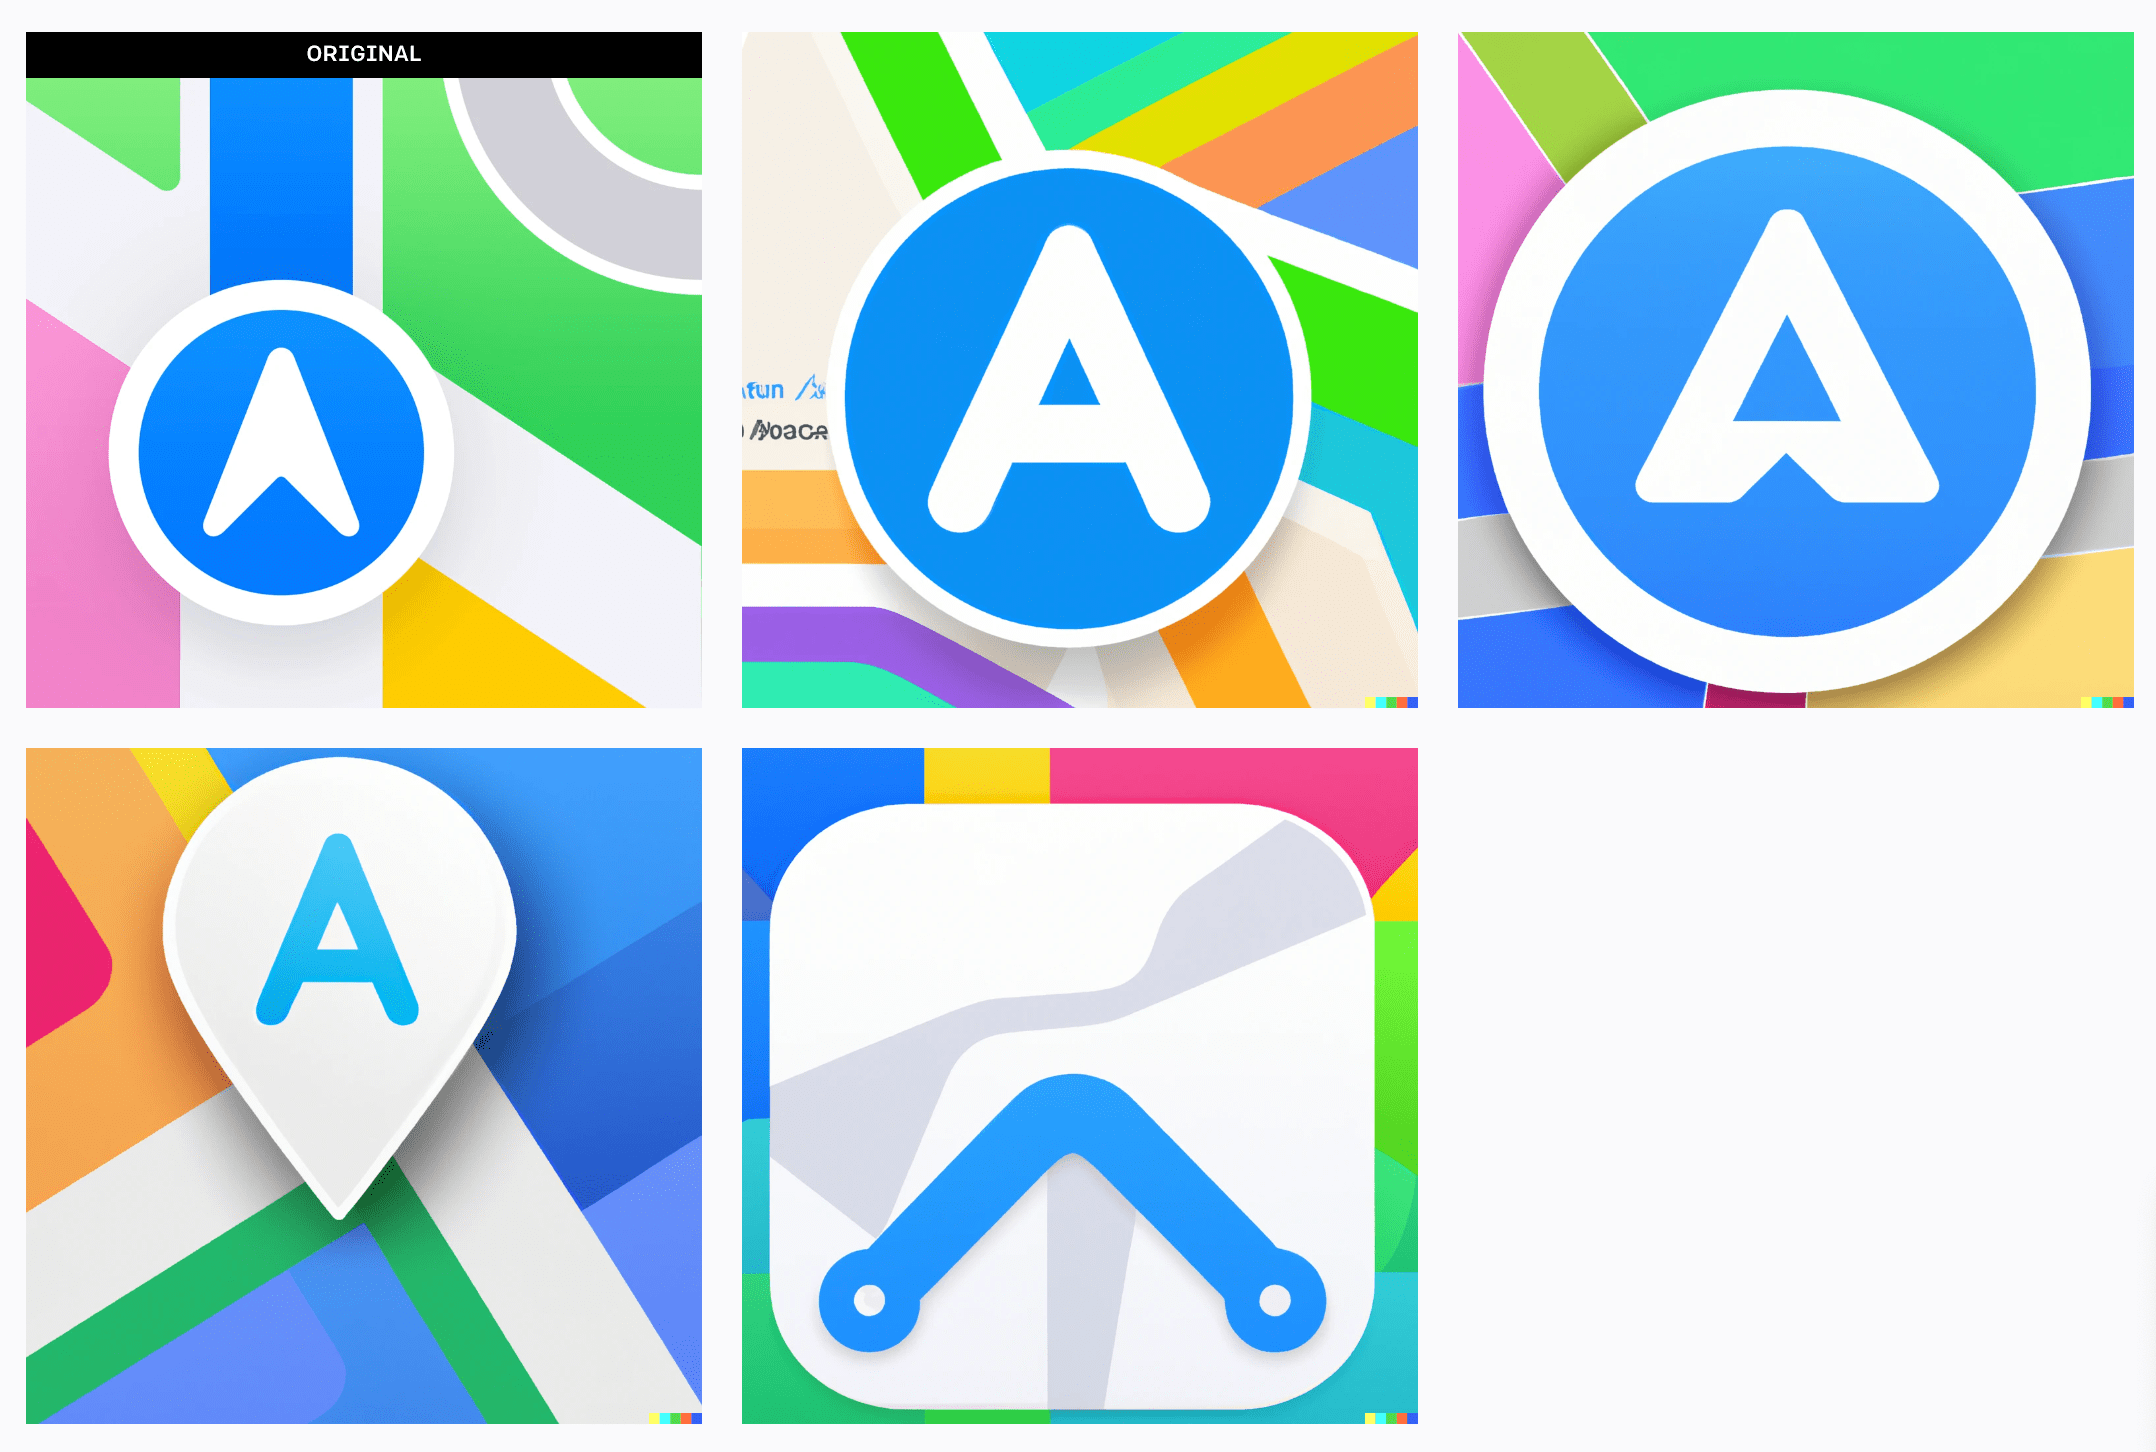 The original “Maps” app icon with 4 AI-generated variations alongside it.